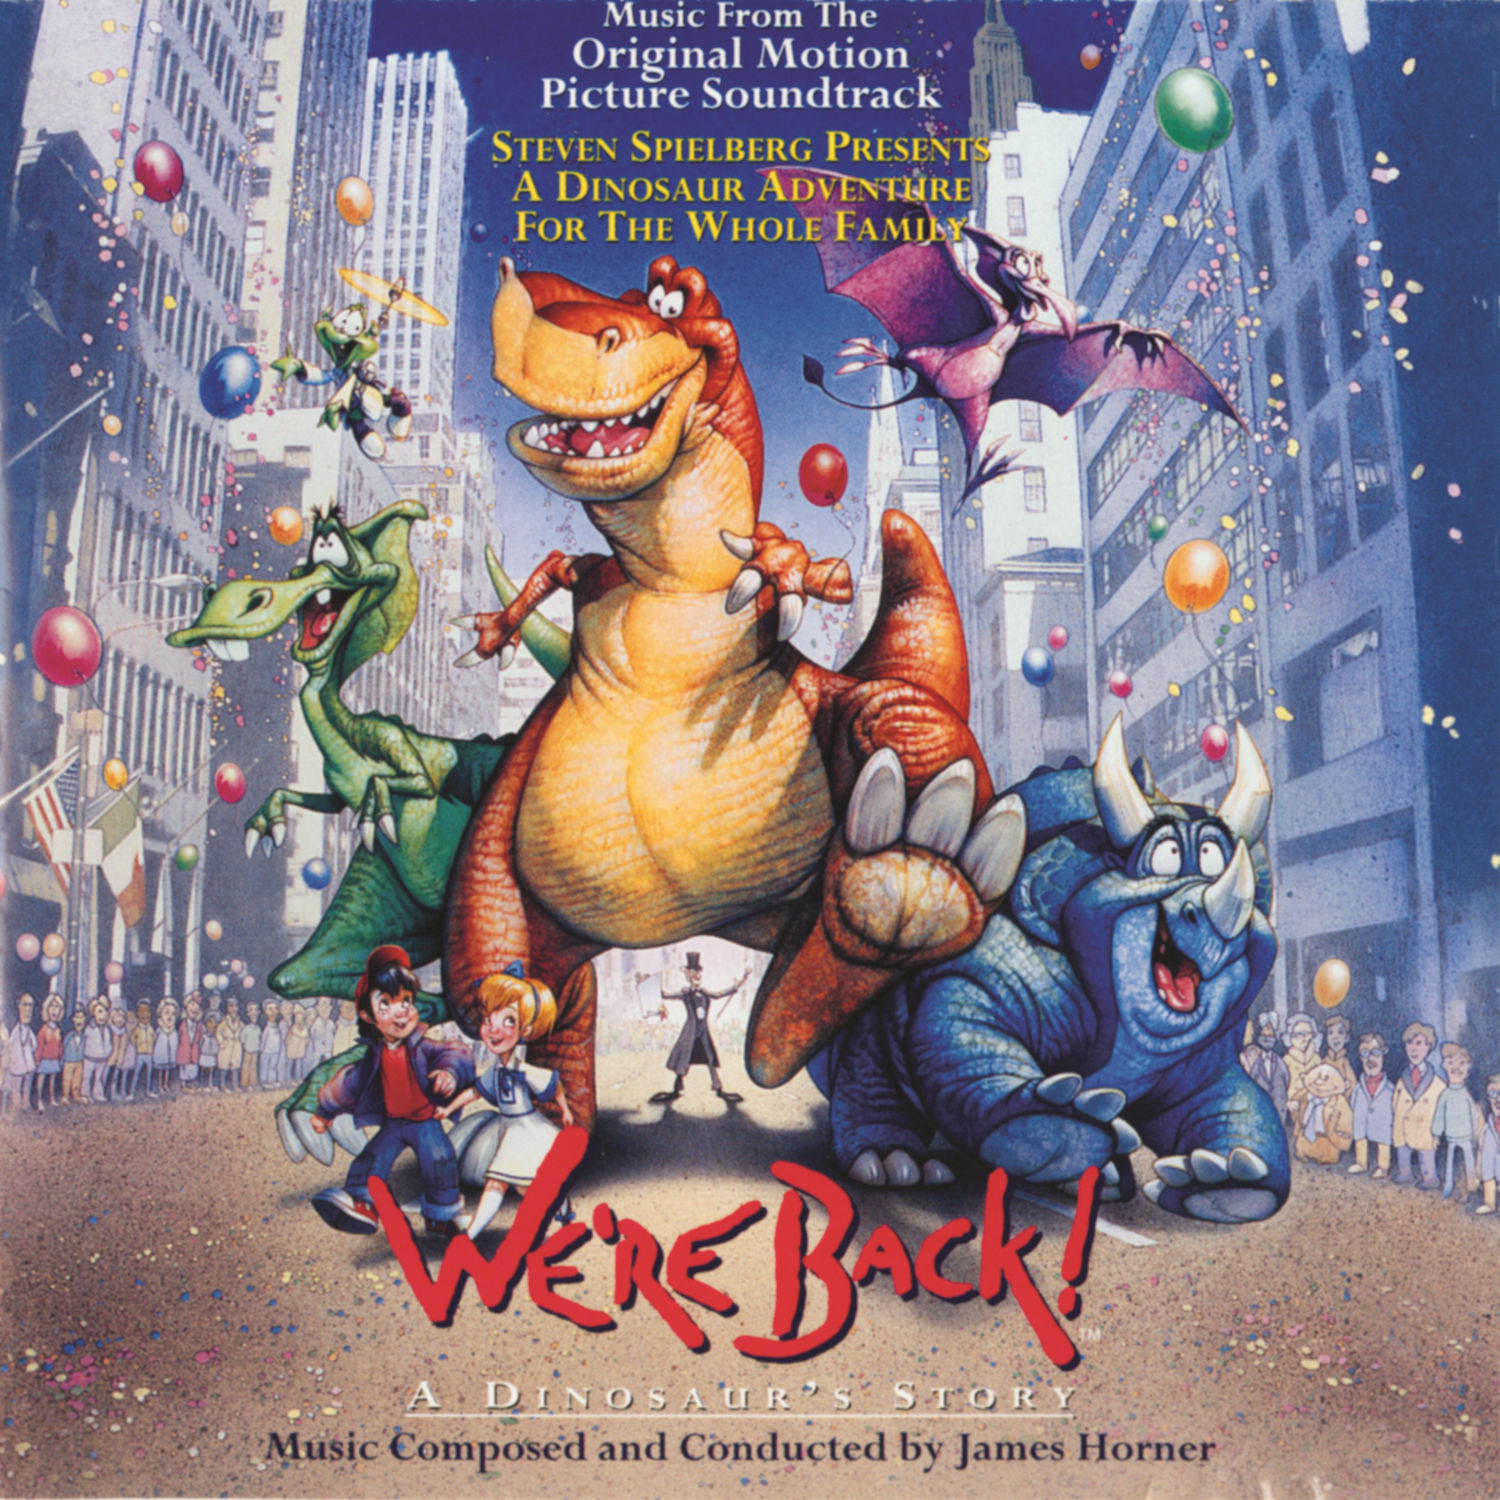 A Dinosaur's Story Music From the Original Motion Picture Soundtrack.